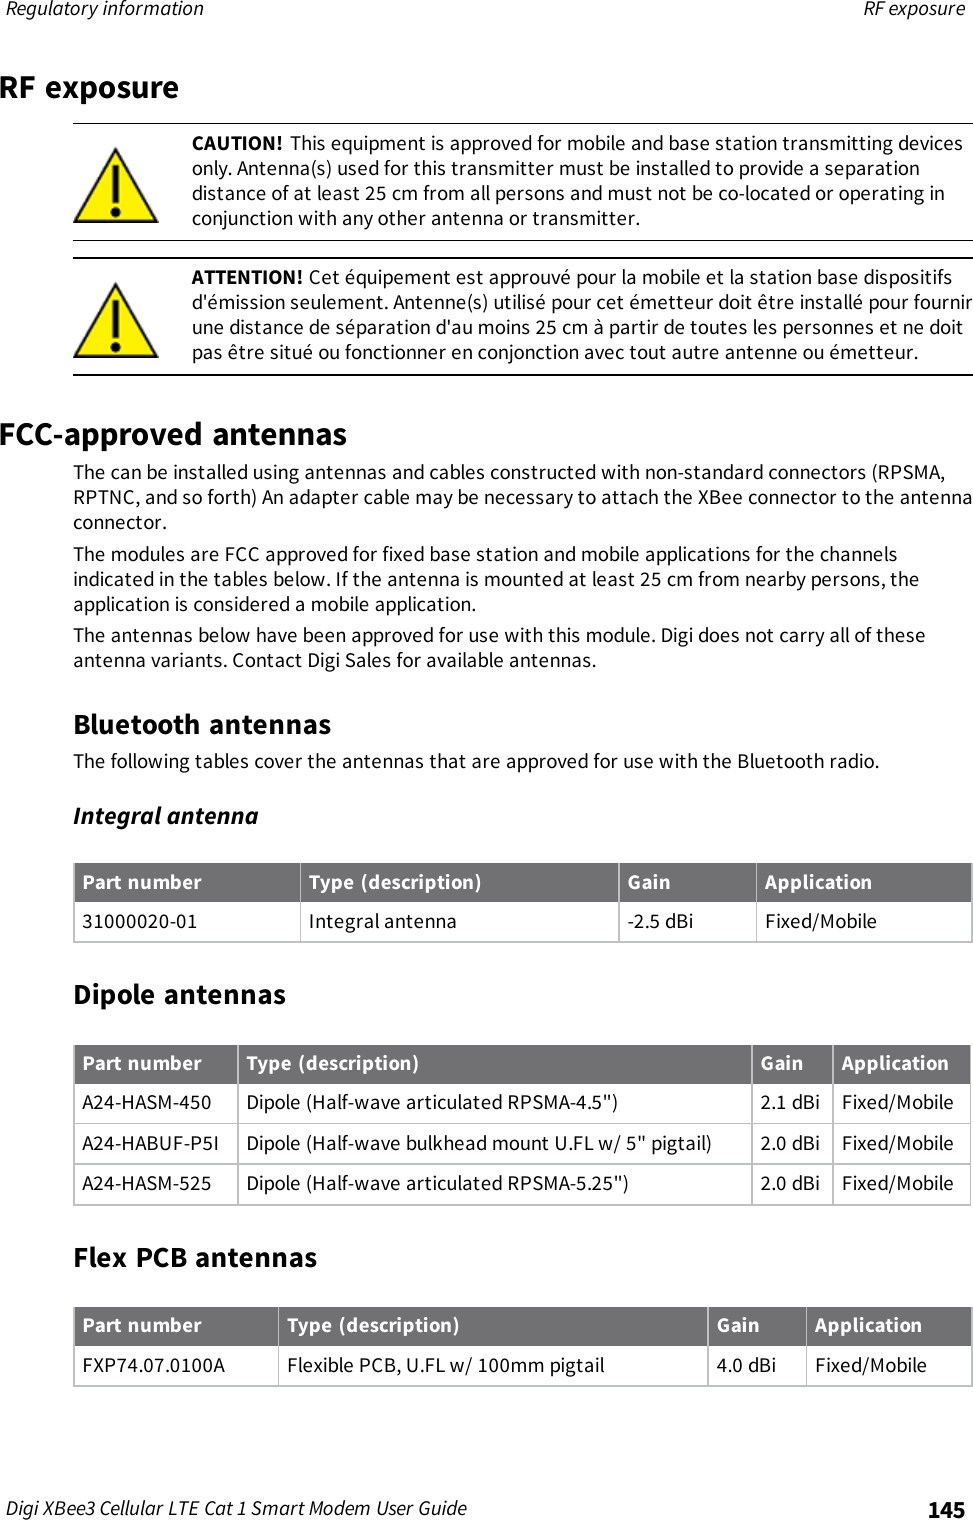 Regulatory information RF exposureDigi XBee3 Cellular LTE Cat 1 Smart Modem User Guide 145RF exposureCAUTION! This equipment is approved for mobile and base station transmitting devicesonly. Antenna(s) used for this transmitter must be installed to provide a separationdistance of at least 25 cm from all persons and must not be co-located or operating inconjunction with any other antenna or transmitter.ATTENTION! Cet équipement est approuvé pour la mobile et la station base dispositifsd&apos;émission seulement. Antenne(s) utilisé pour cet émetteur doit être installé pour fournirune distance de séparation d&apos;au moins 25 cm à partir de toutes les personnes et ne doitpas être situé ou fonctionner en conjonction avec tout autre antenne ou émetteur.FCC-approved antennasThe can be installed using antennas and cables constructed with non-standard connectors (RPSMA,RPTNC, and so forth) An adapter cable may be necessary to attach the XBee connector to the antennaconnector.The modules are FCC approved for fixed base station and mobile applications for the channelsindicated in the tables below. If the antenna is mounted at least 25 cm from nearby persons, theapplication is considered a mobile application.The antennas below have been approved for use with this module. Digi does not carry all of theseantenna variants. Contact Digi Sales for available antennas.Bluetooth antennasThe following tables cover the antennas that are approved for use with the Bluetooth radio.Integral antennaPart number Type (description) Gain Application31000020-01 Integral antenna -2.5 dBi Fixed/MobileDipole antennasPart number Type (description) Gain ApplicationA24-HASM-450 Dipole (Half-wave articulated RPSMA-4.5&quot;) 2.1 dBi Fixed/MobileA24-HABUF-P5I Dipole (Half-wave bulkhead mount U.FL w/ 5&quot; pigtail) 2.0 dBi Fixed/MobileA24-HASM-525 Dipole (Half-wave articulated RPSMA-5.25&quot;) 2.0 dBi Fixed/MobileFlex PCB antennasPart number Type (description) Gain ApplicationFXP74.07.0100A Flexible PCB, U.FL w/ 100mm pigtail 4.0 dBi Fixed/Mobile